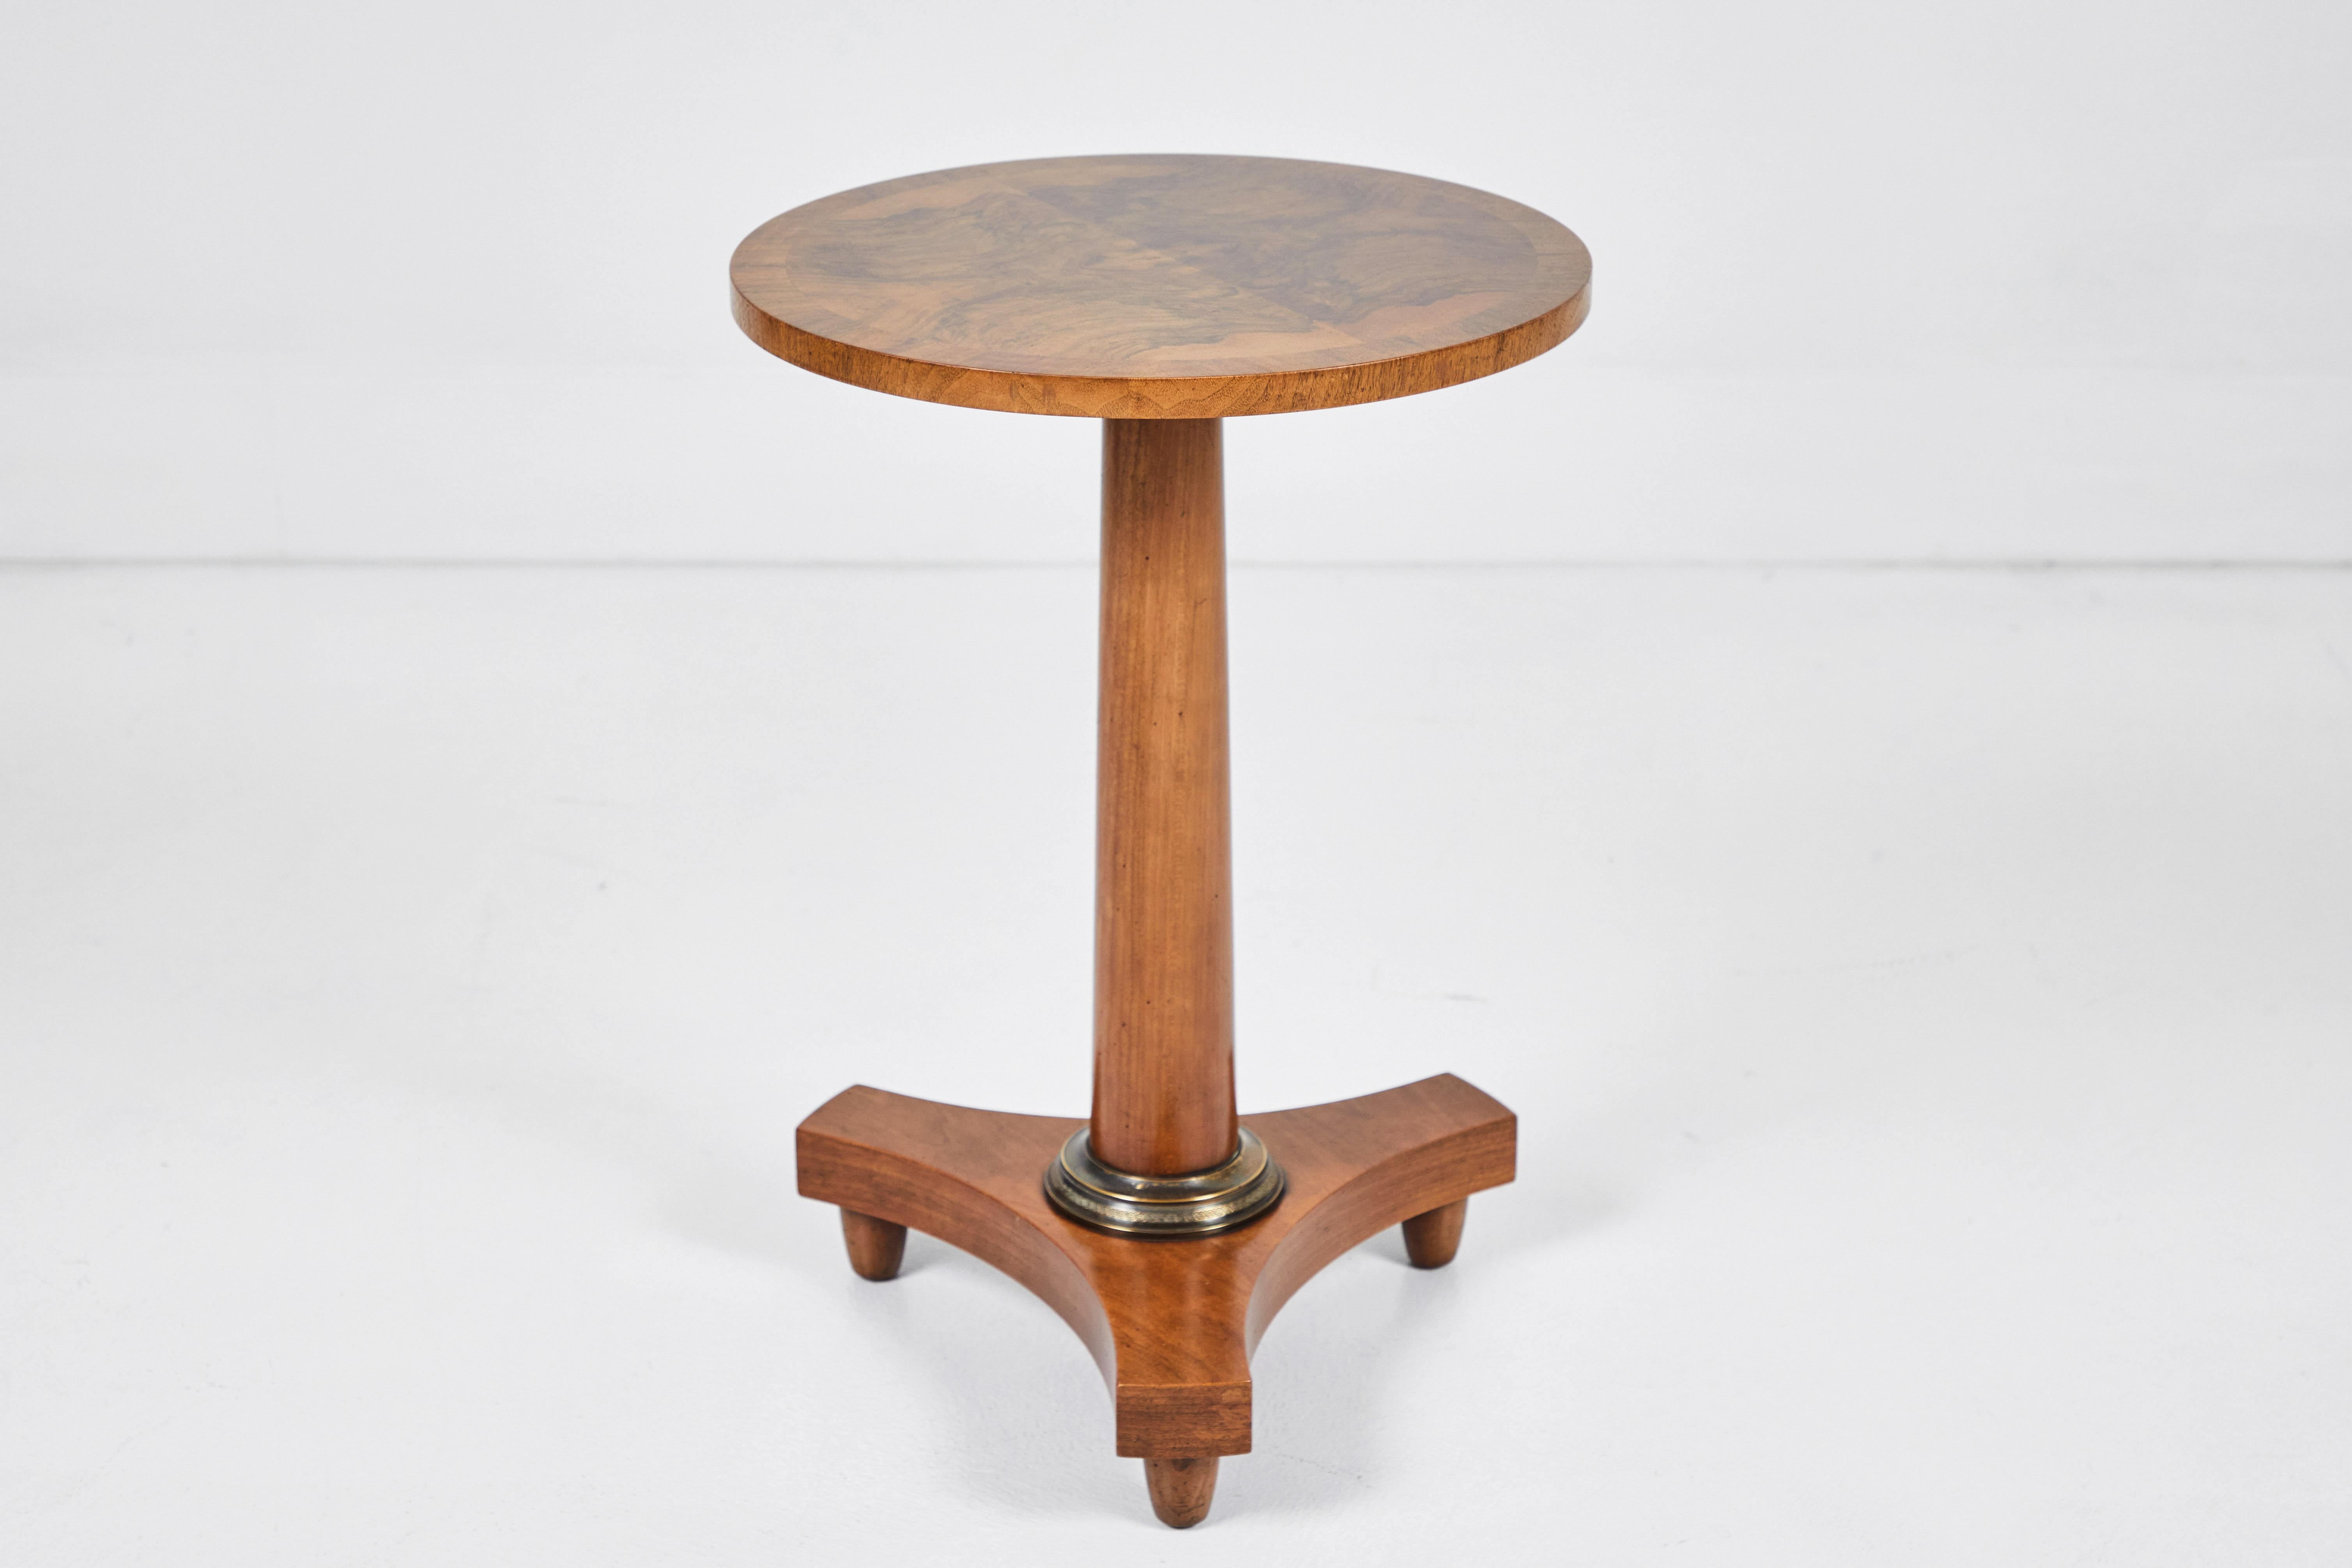 This Baker Empire occasional table is in excellent condition. The grain in the burl wood walnut top is beautiful. The the stem base tapers out just slightly and finishes with a wonderful brass detail. The three legged base extends 5.5